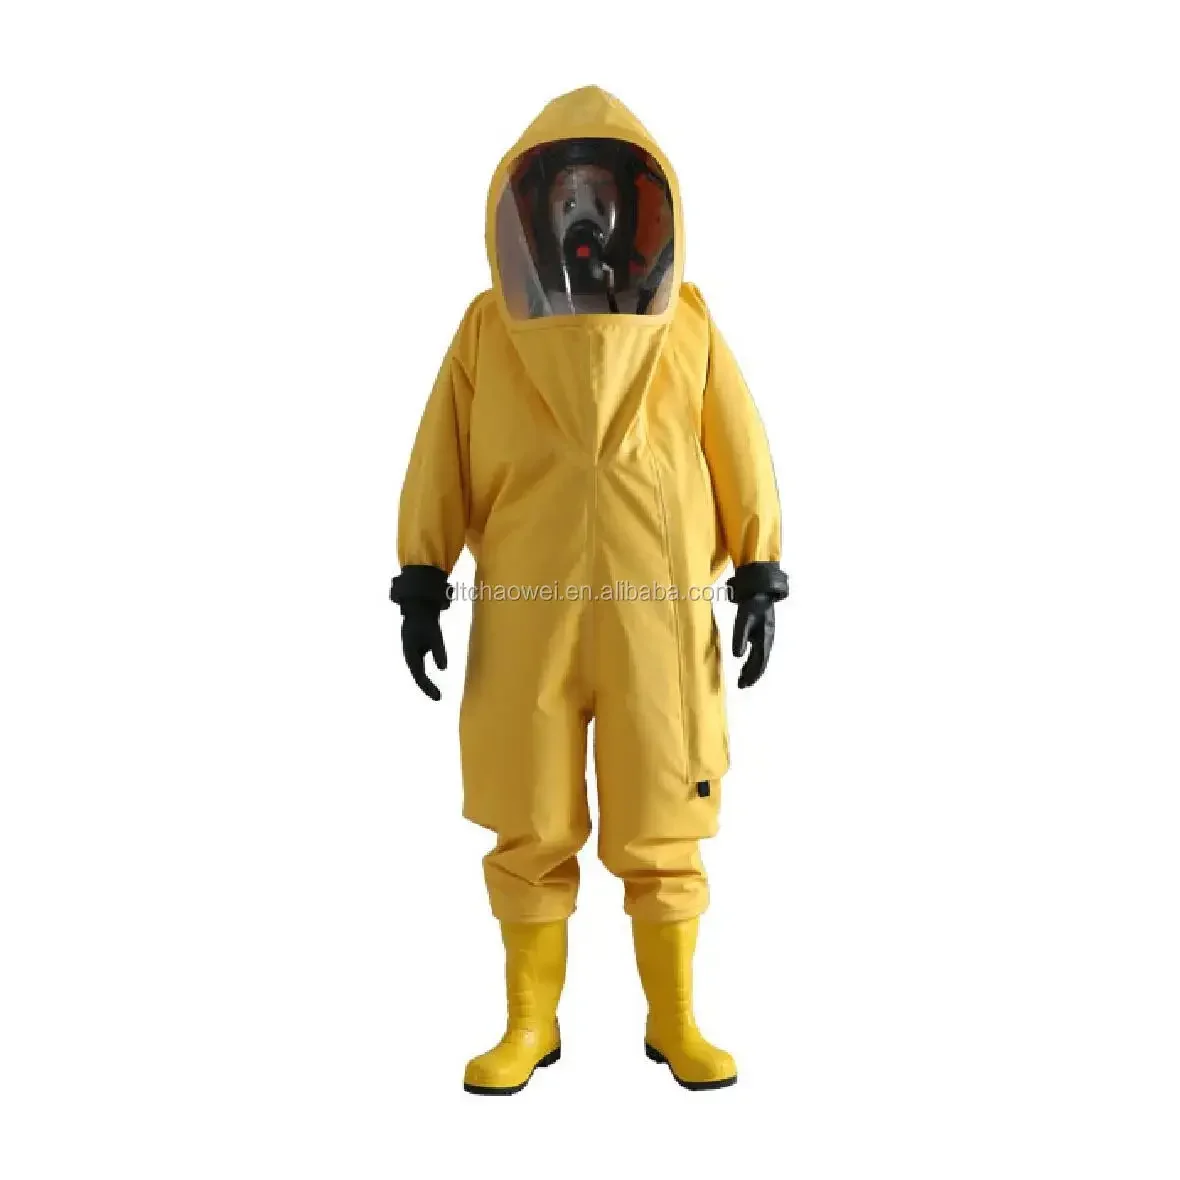 Safety Hazmat and Chemical Resistant Protective Encapsulated Suits